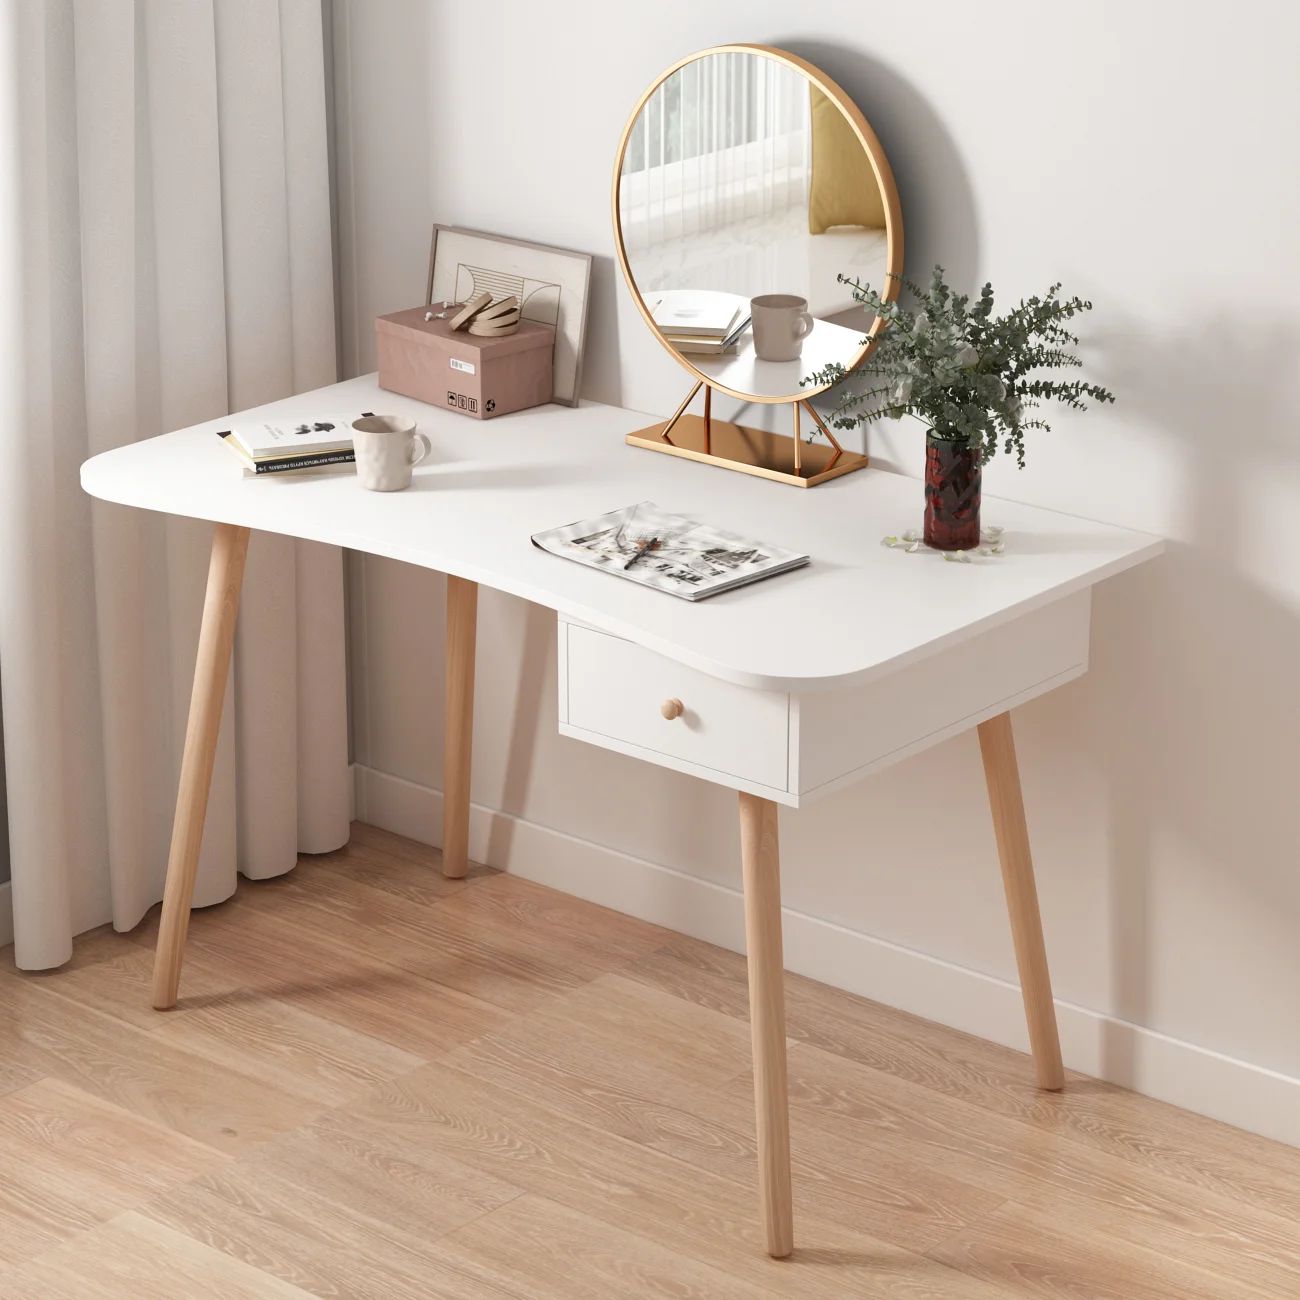 Castaldo Vanity Table With Curved Desktop And One Drawer | Wayfair North America